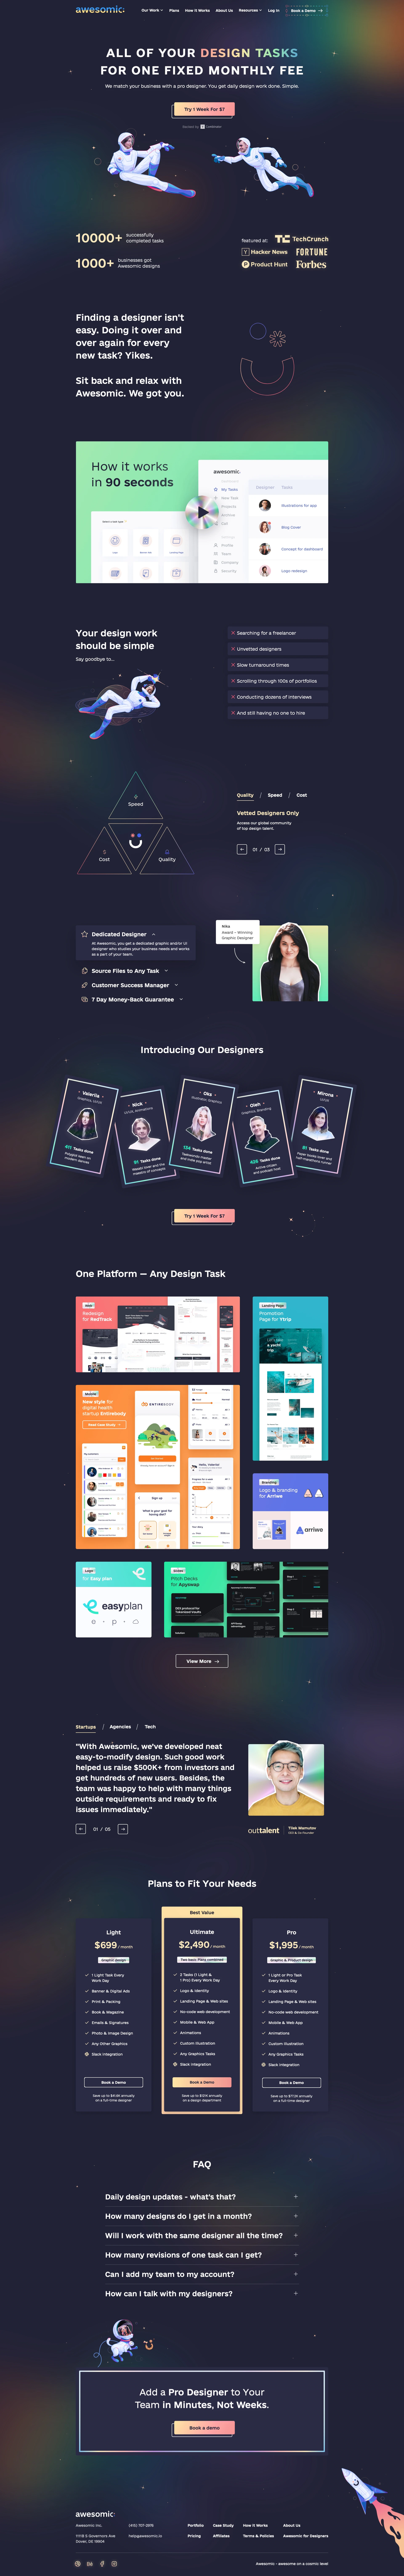 Awesomic Landing Page Example: Awesomic is an app that matches designers with their clients, like yourself. Get your first results in 24h and forget about missed deadlines.